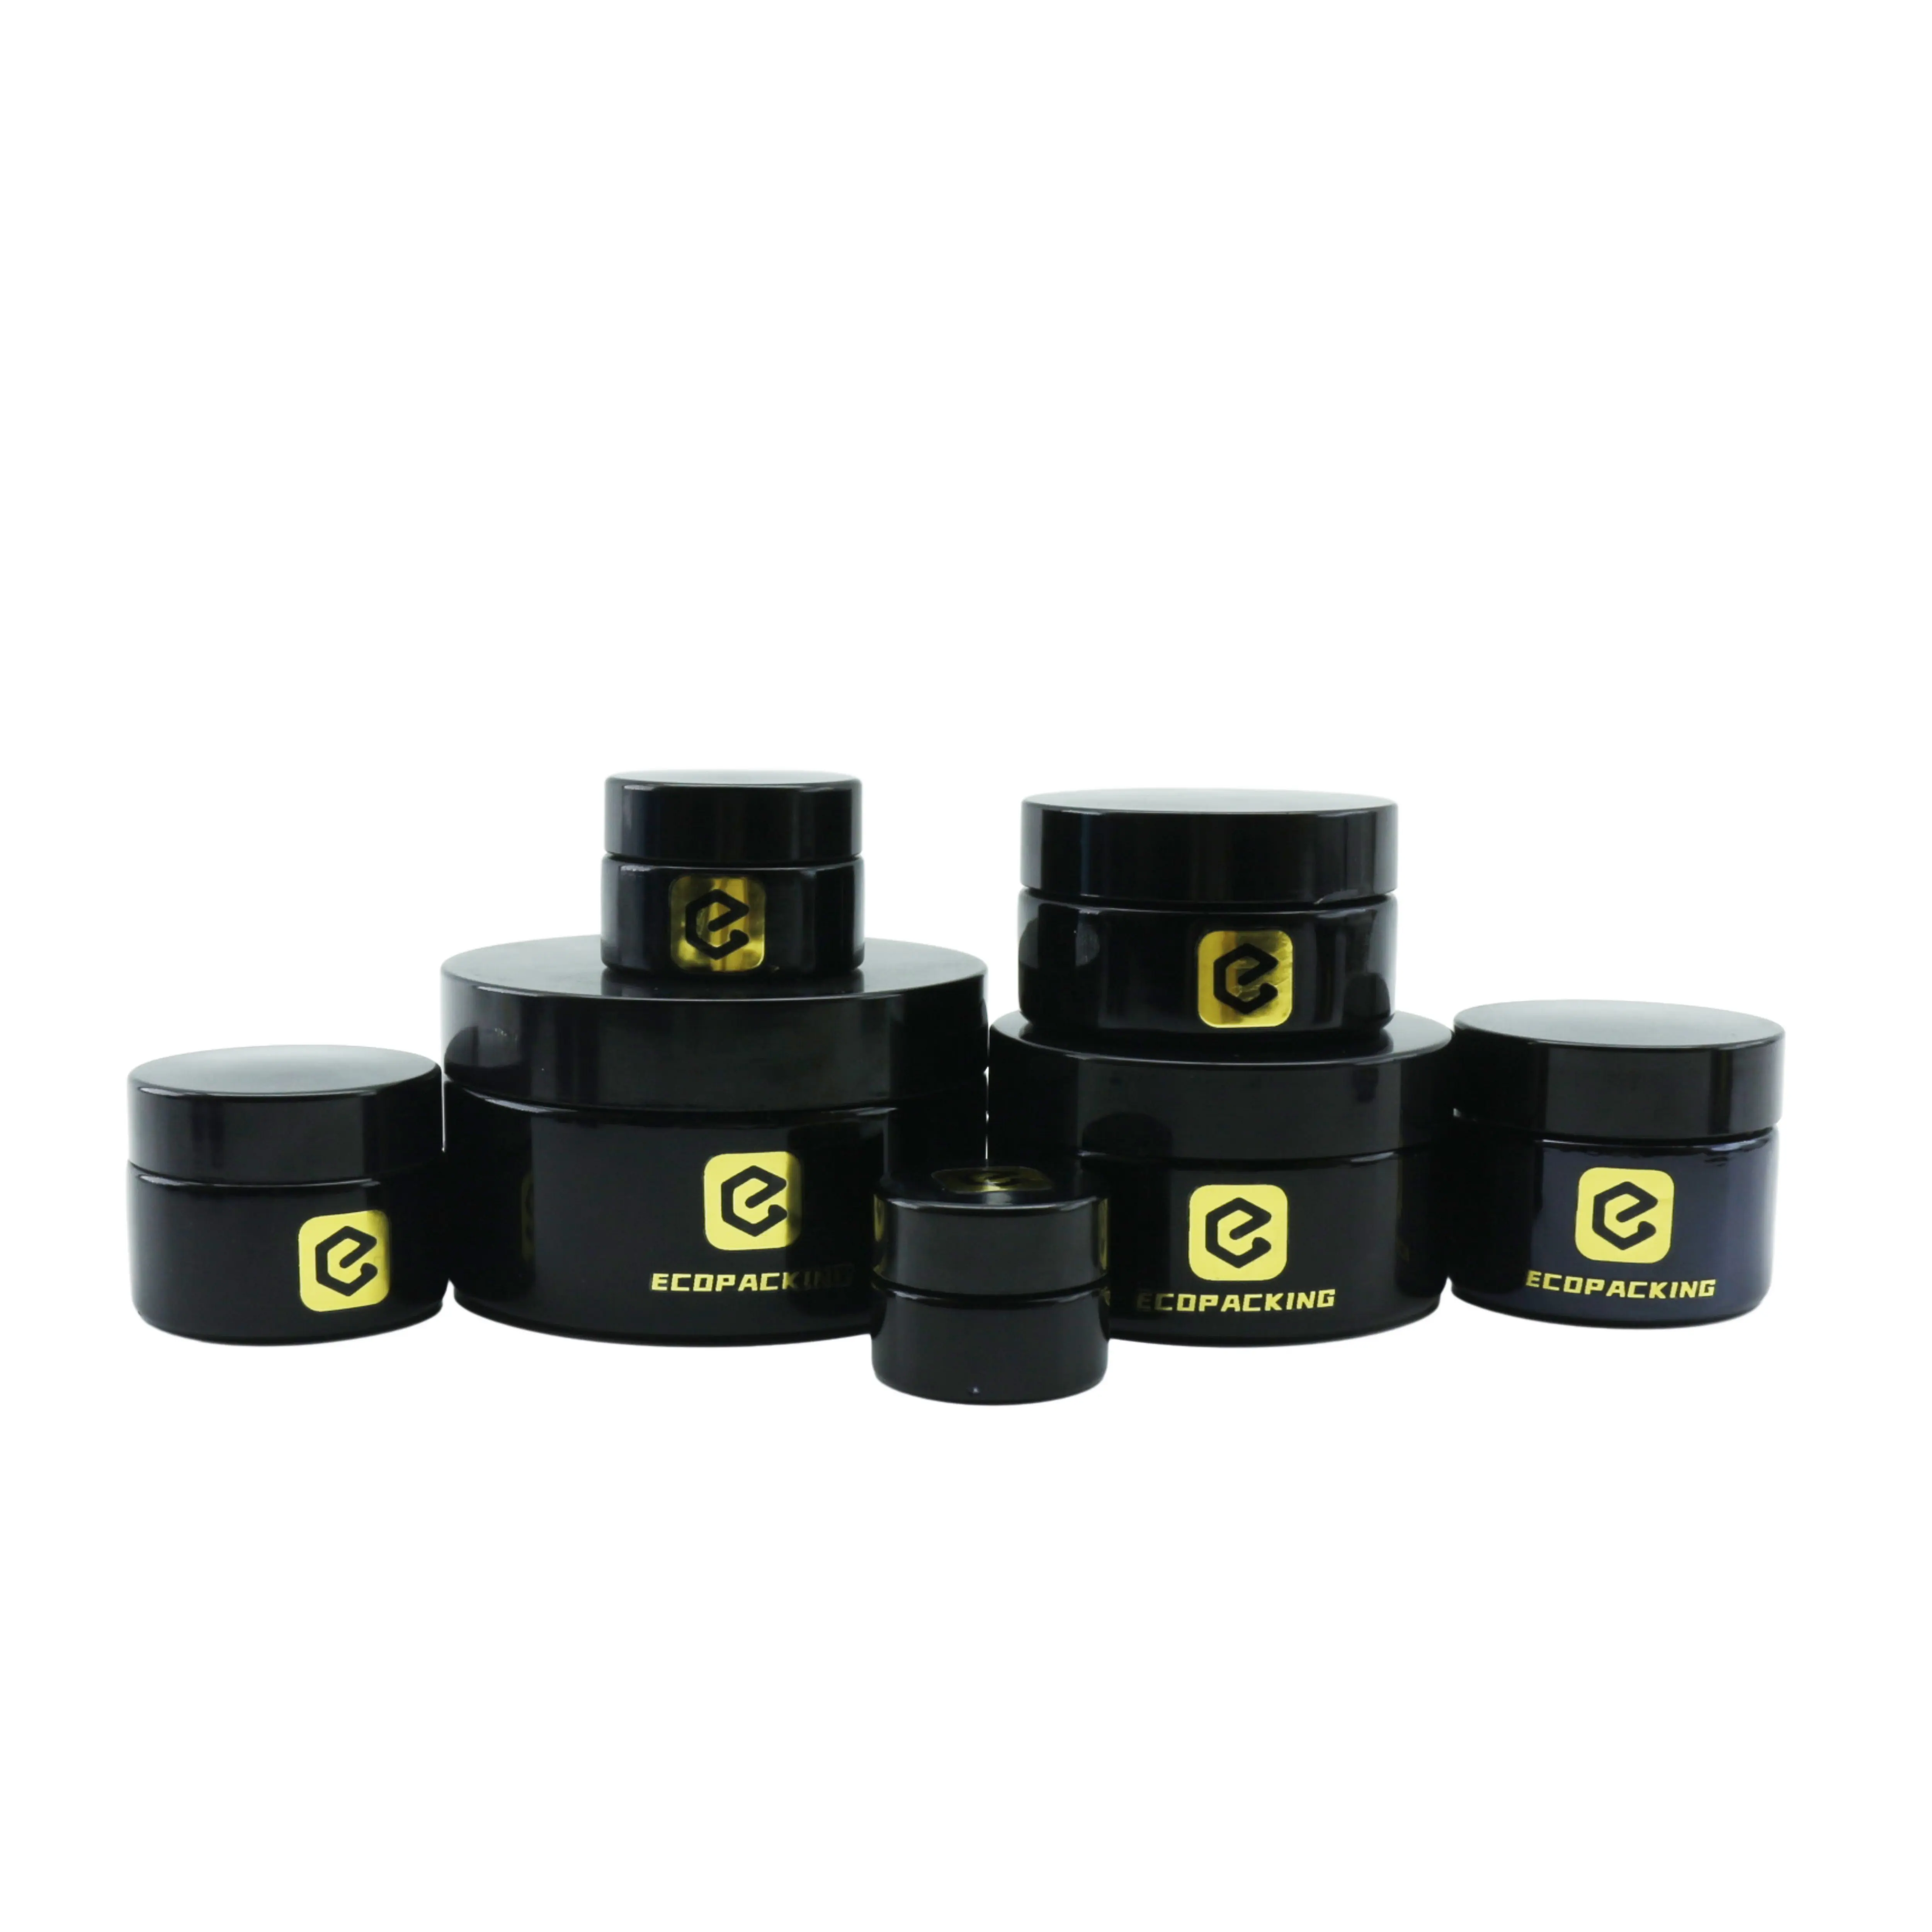 Hot sale cosmetic face cream container 5ml 15ml 30ml 50ml 100ml black glass jar with plastic lid